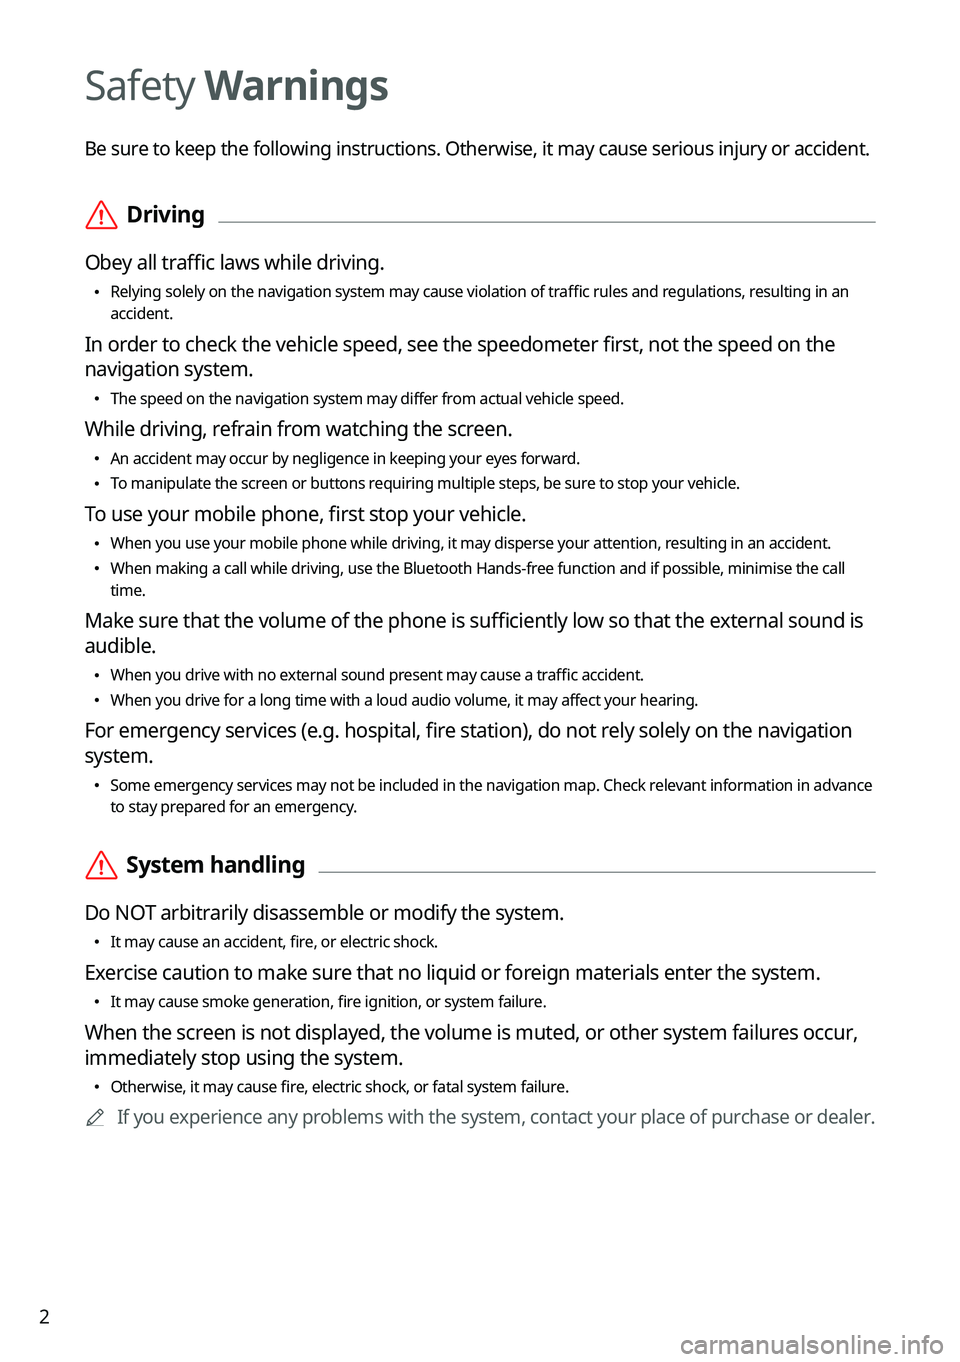 KIA SORENTO 2023  Navigation System Quick Reference Guide 2
Safety Warnings
Be sure to keep the following instructions. Otherwise, it may cause serious injury or accident.
 ÝDriving
Obey all traffic laws while driving.
 •
Relying solely on the navigation 